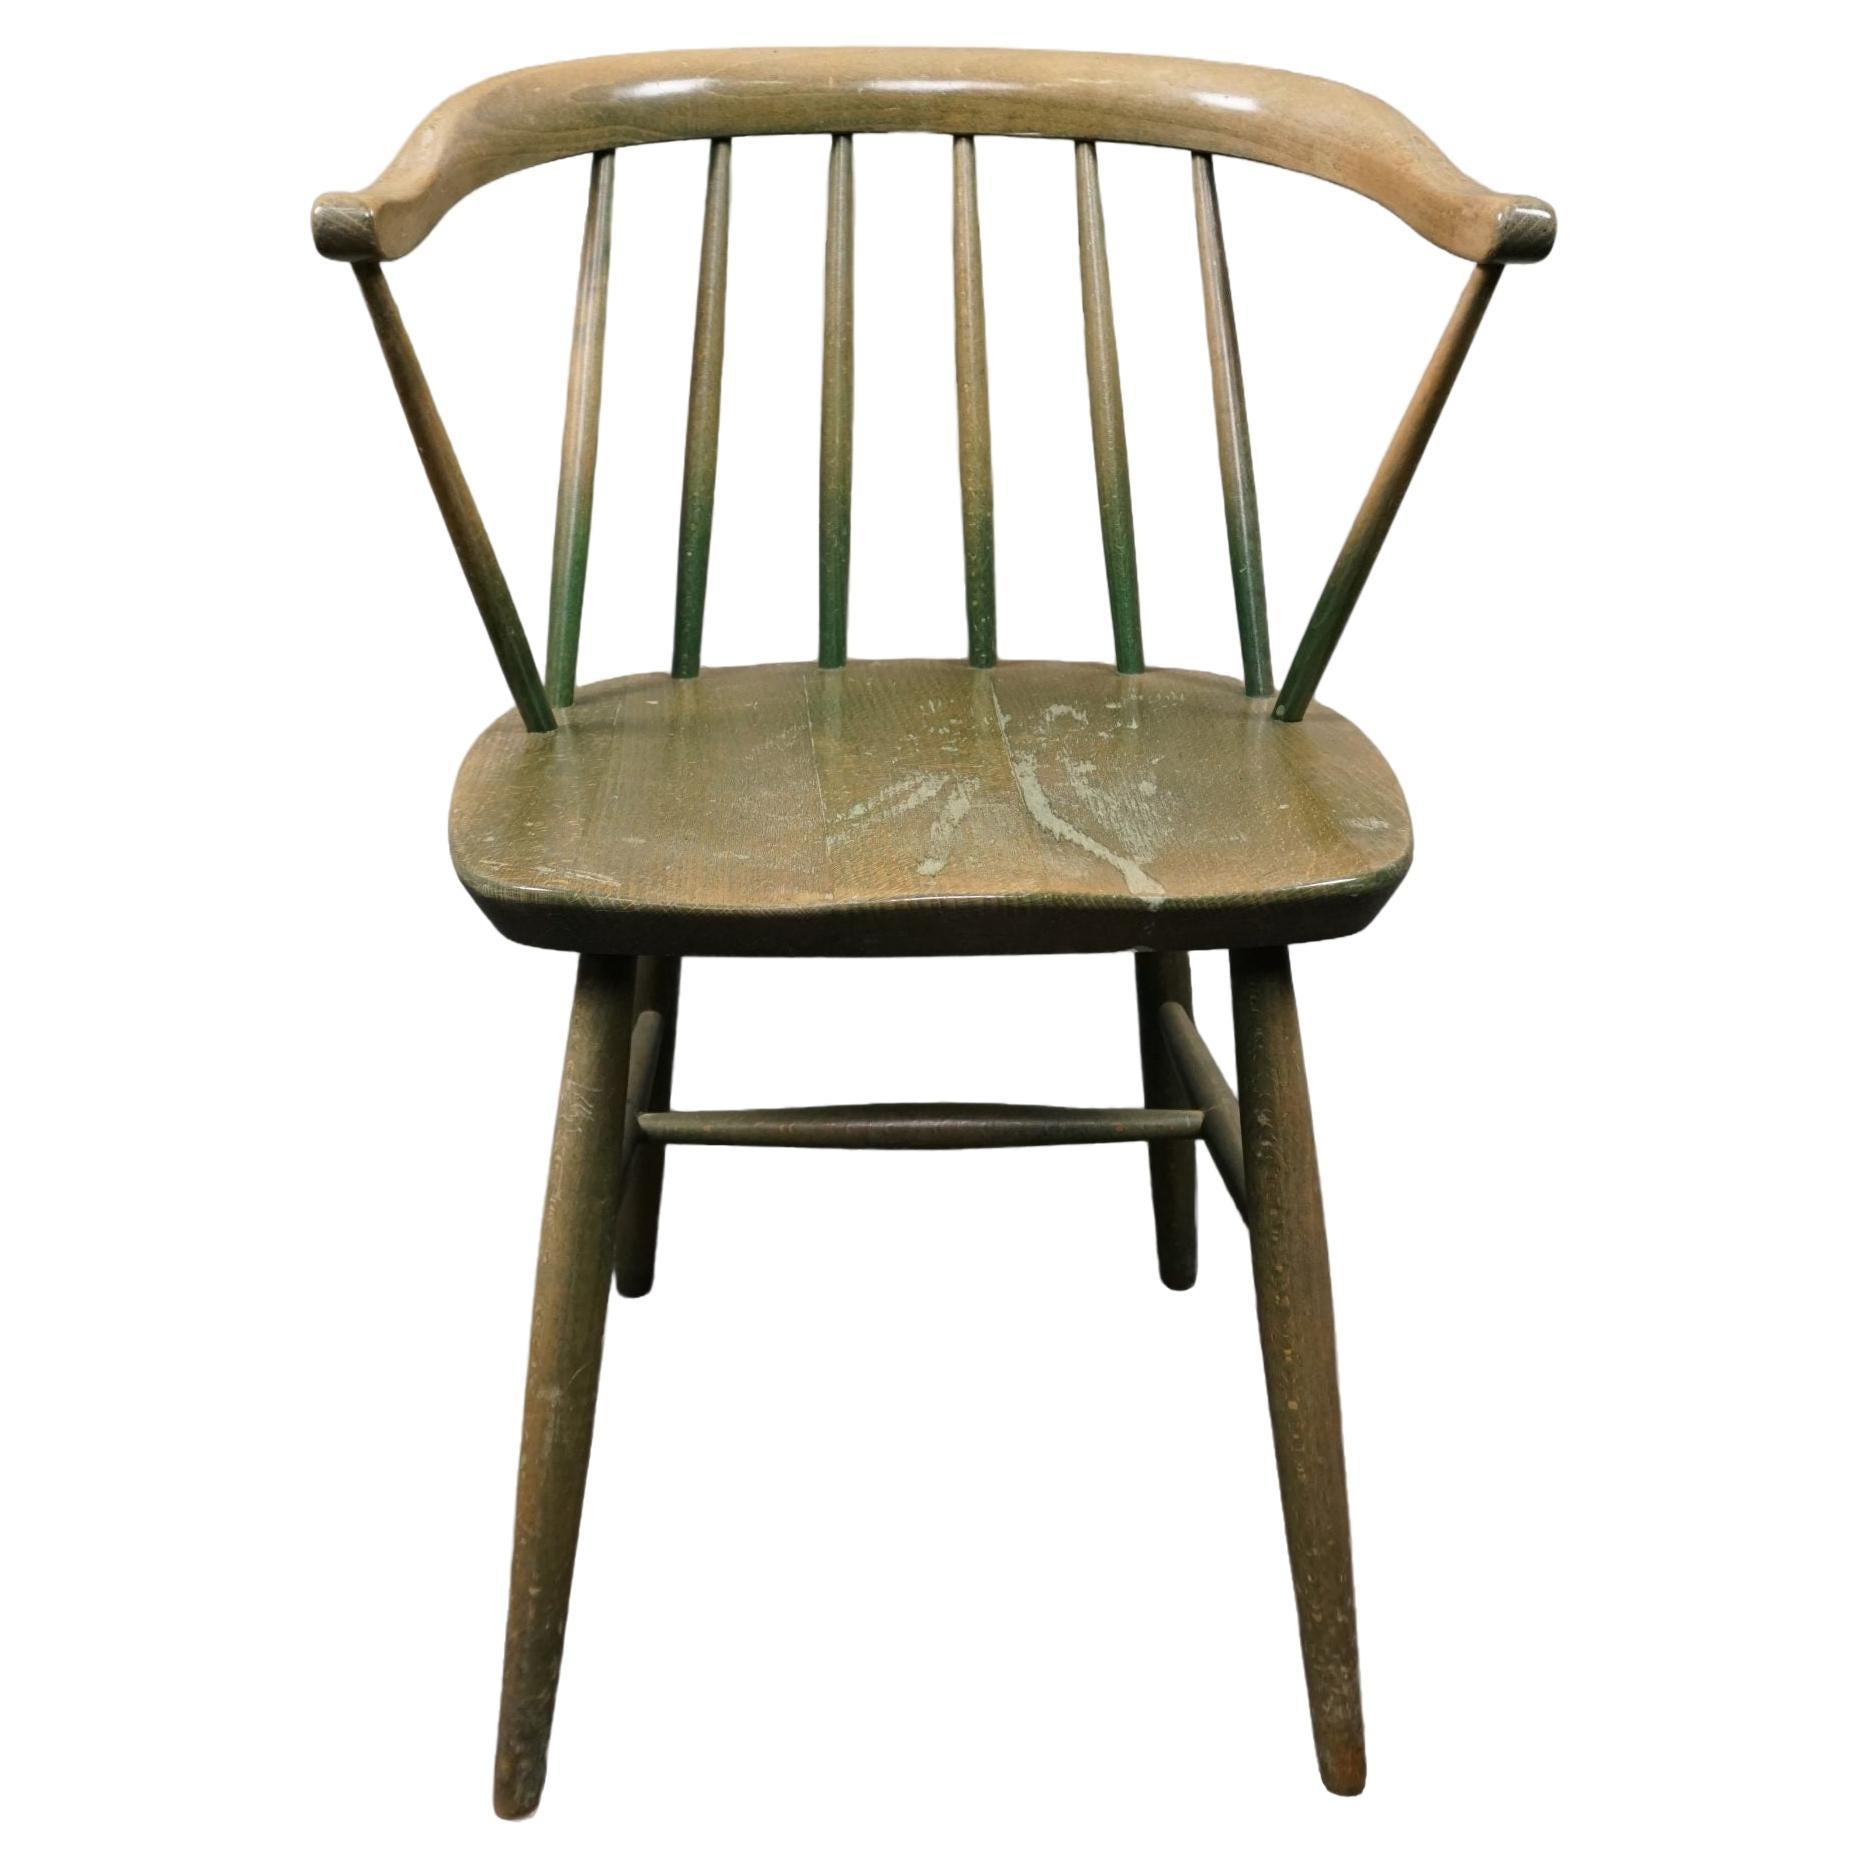 Beautiful vintage worn green spindle chair For Sale